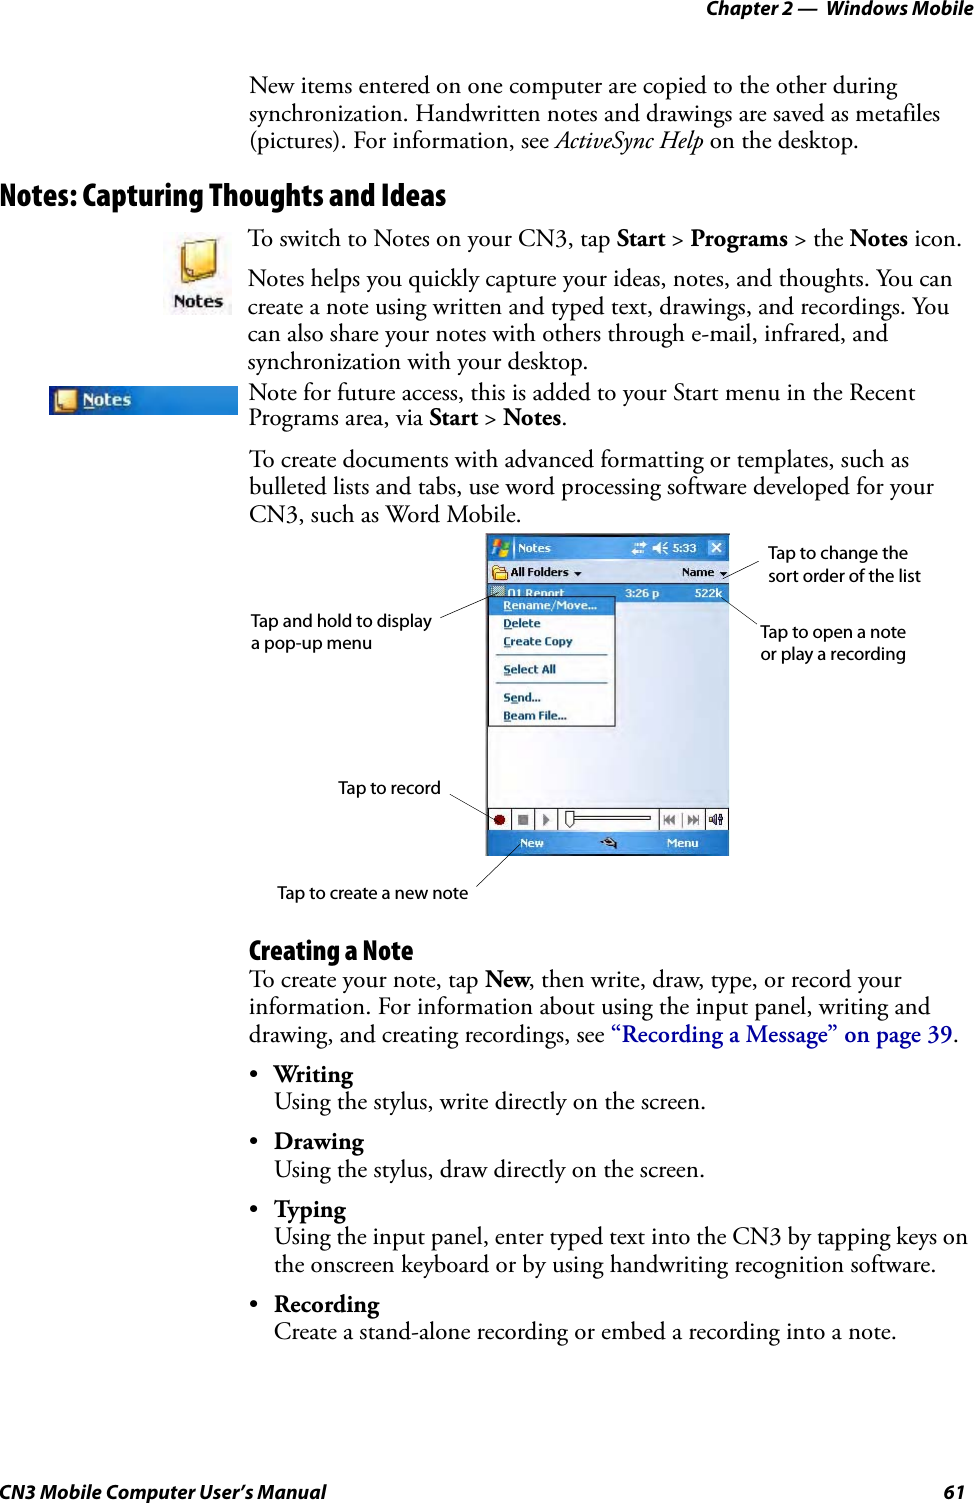 Chapter 2 —  Windows MobileCN3 Mobile Computer User’s Manual 61New items entered on one computer are copied to the other during synchronization. Handwritten notes and drawings are saved as metafiles (pictures). For information, see ActiveSync Help on the desktop.Notes: Capturing Thoughts and IdeasTo create documents with advanced formatting or templates, such as bulleted lists and tabs, use word processing software developed for your CN3, such as Word Mobile.Creating a NoteTo create your note, tap New, then write, draw, type, or record your information. For information about using the input panel, writing and drawing, and creating recordings, see “Recording a Message” on page 39.•WritingUsing the stylus, write directly on the screen.•DrawingUsing the stylus, draw directly on the screen.•TypingUsing the input panel, enter typed text into the CN3 by tapping keys on the onscreen keyboard or by using handwriting recognition software.•RecordingCreate a stand-alone recording or embed a recording into a note.To switch to Notes on your CN3, tap Start &gt; Programs &gt; the Notes icon.Notes helps you quickly capture your ideas, notes, and thoughts. You can create a note using written and typed text, drawings, and recordings. You can also share your notes with others through e-mail, infrared, and synchronization with your desktop.Note for future access, this is added to your Start menu in the Recent Programs area, via Start &gt; Notes. Tap to change the Tap to open a note Tap and hold to display Tap to recordTap to create a new notea pop-up menusort order of the listor play a recording